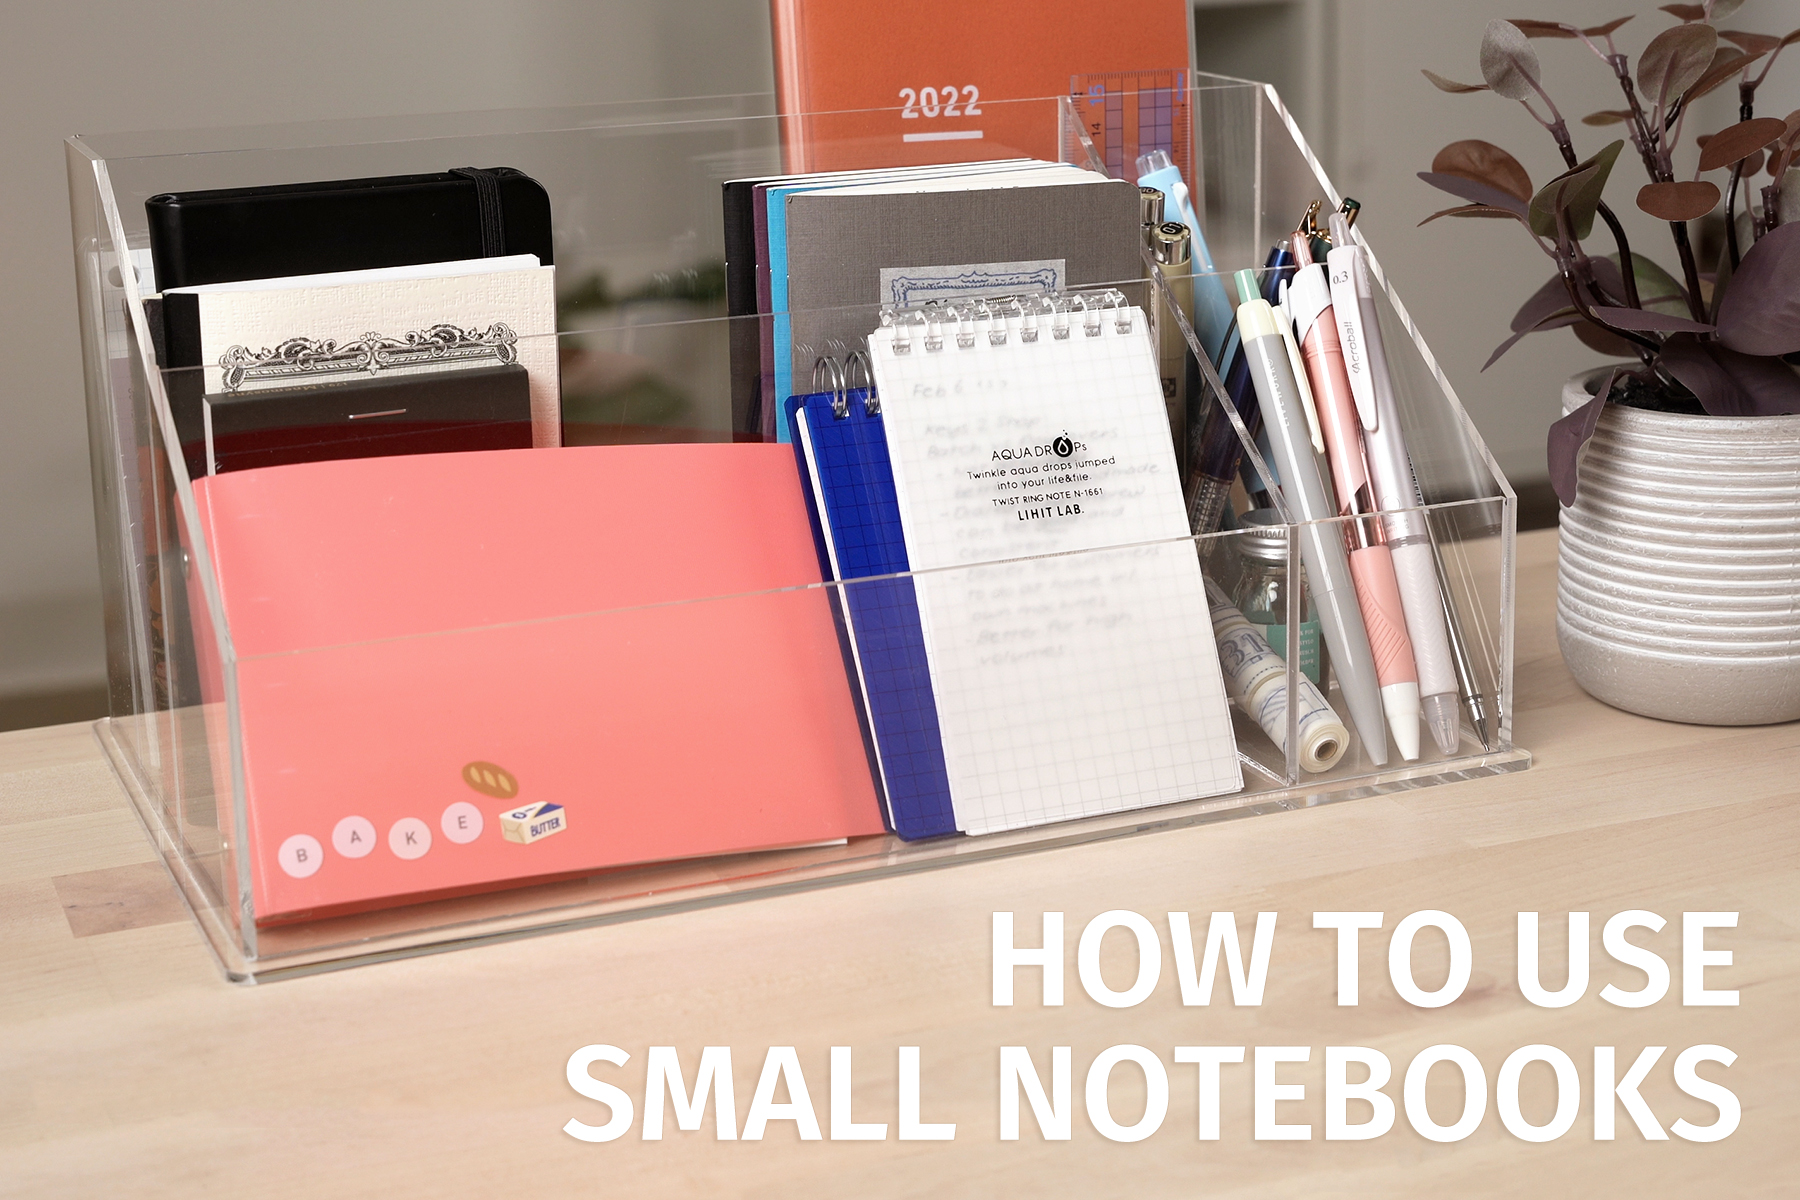 How to Use Small Notebooks